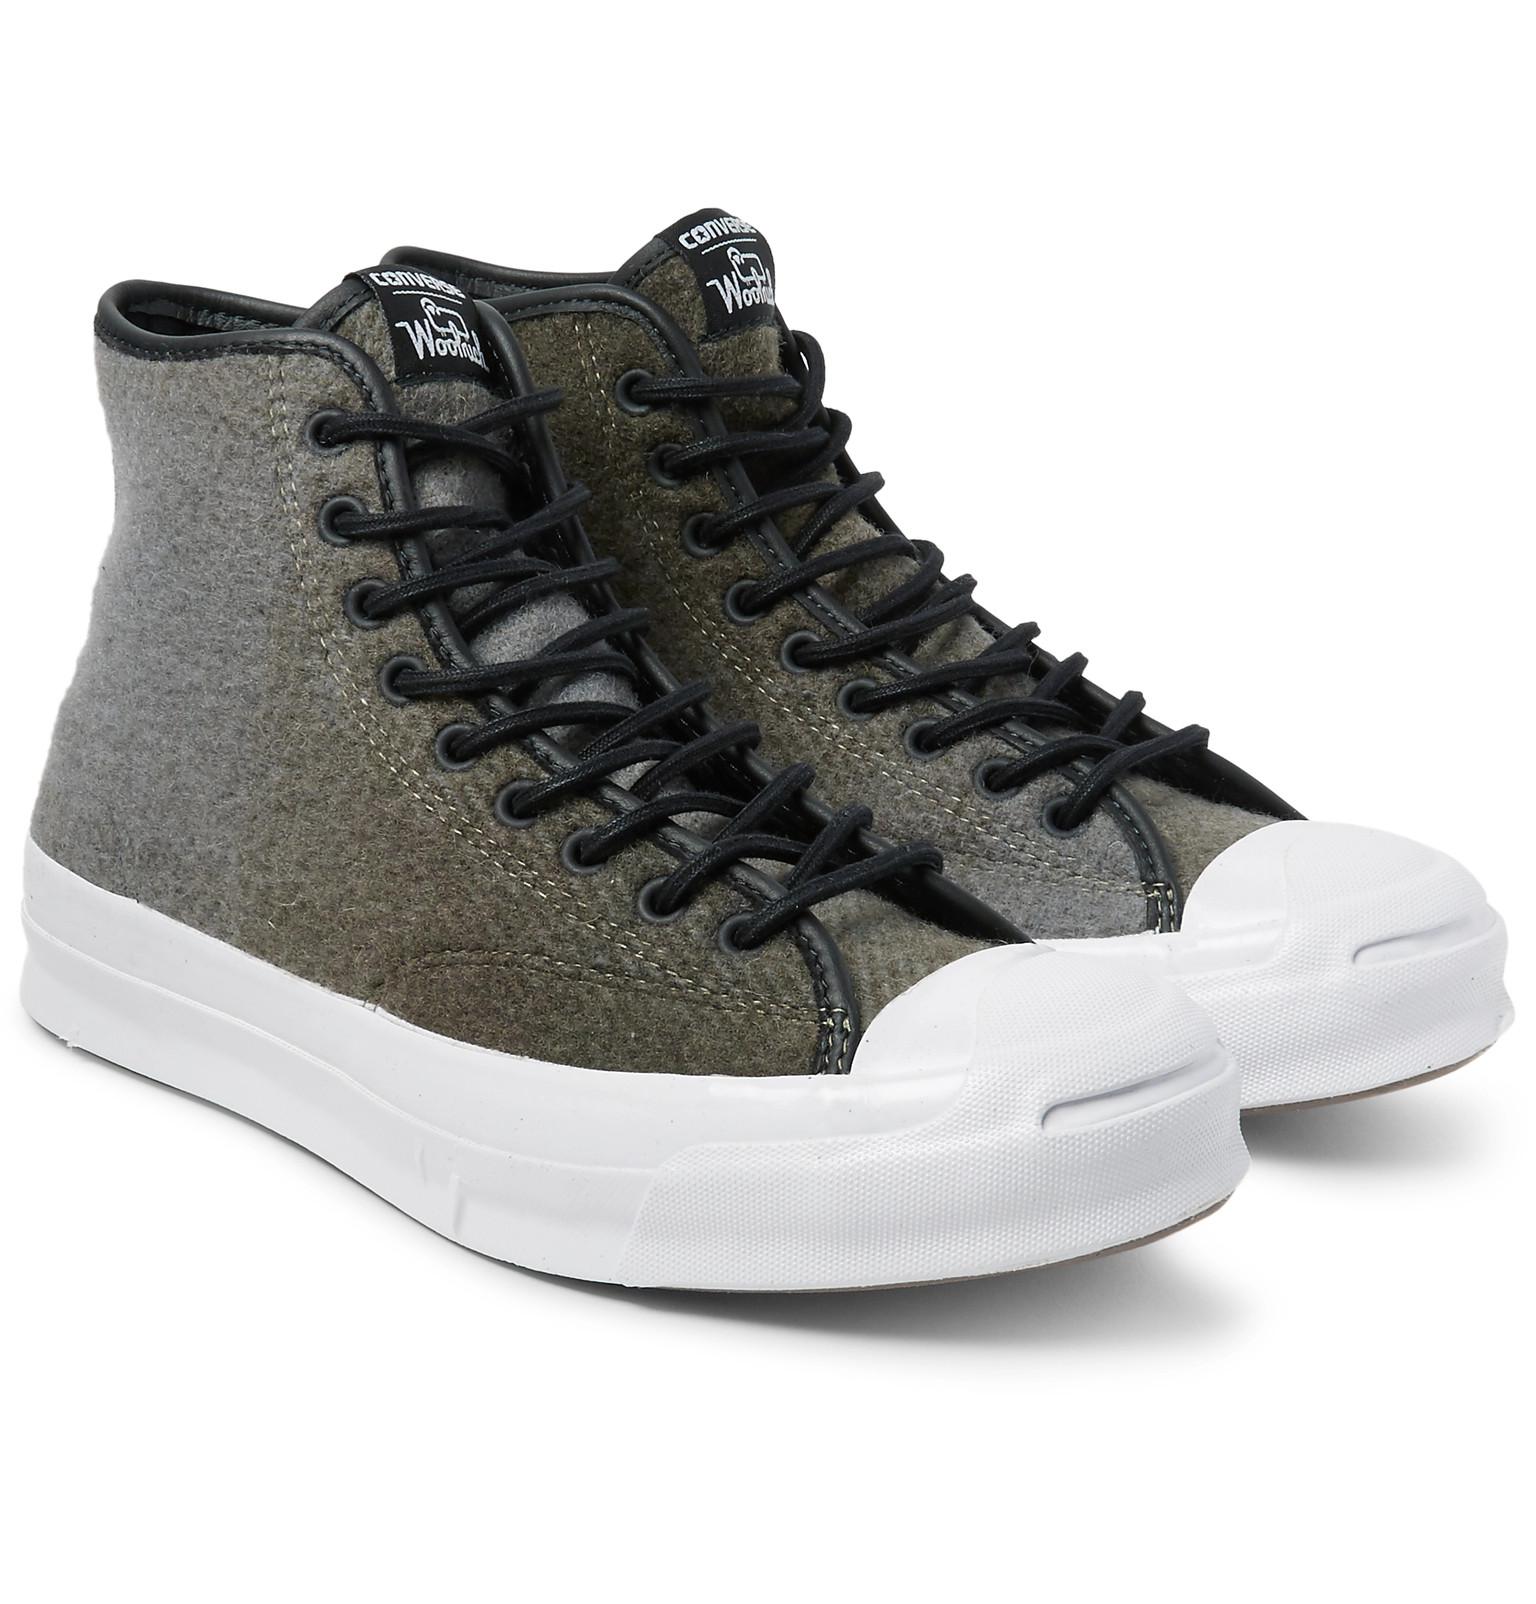 Lyst - Converse + Woolrich Jack Purcell Signature Wool High-top ...